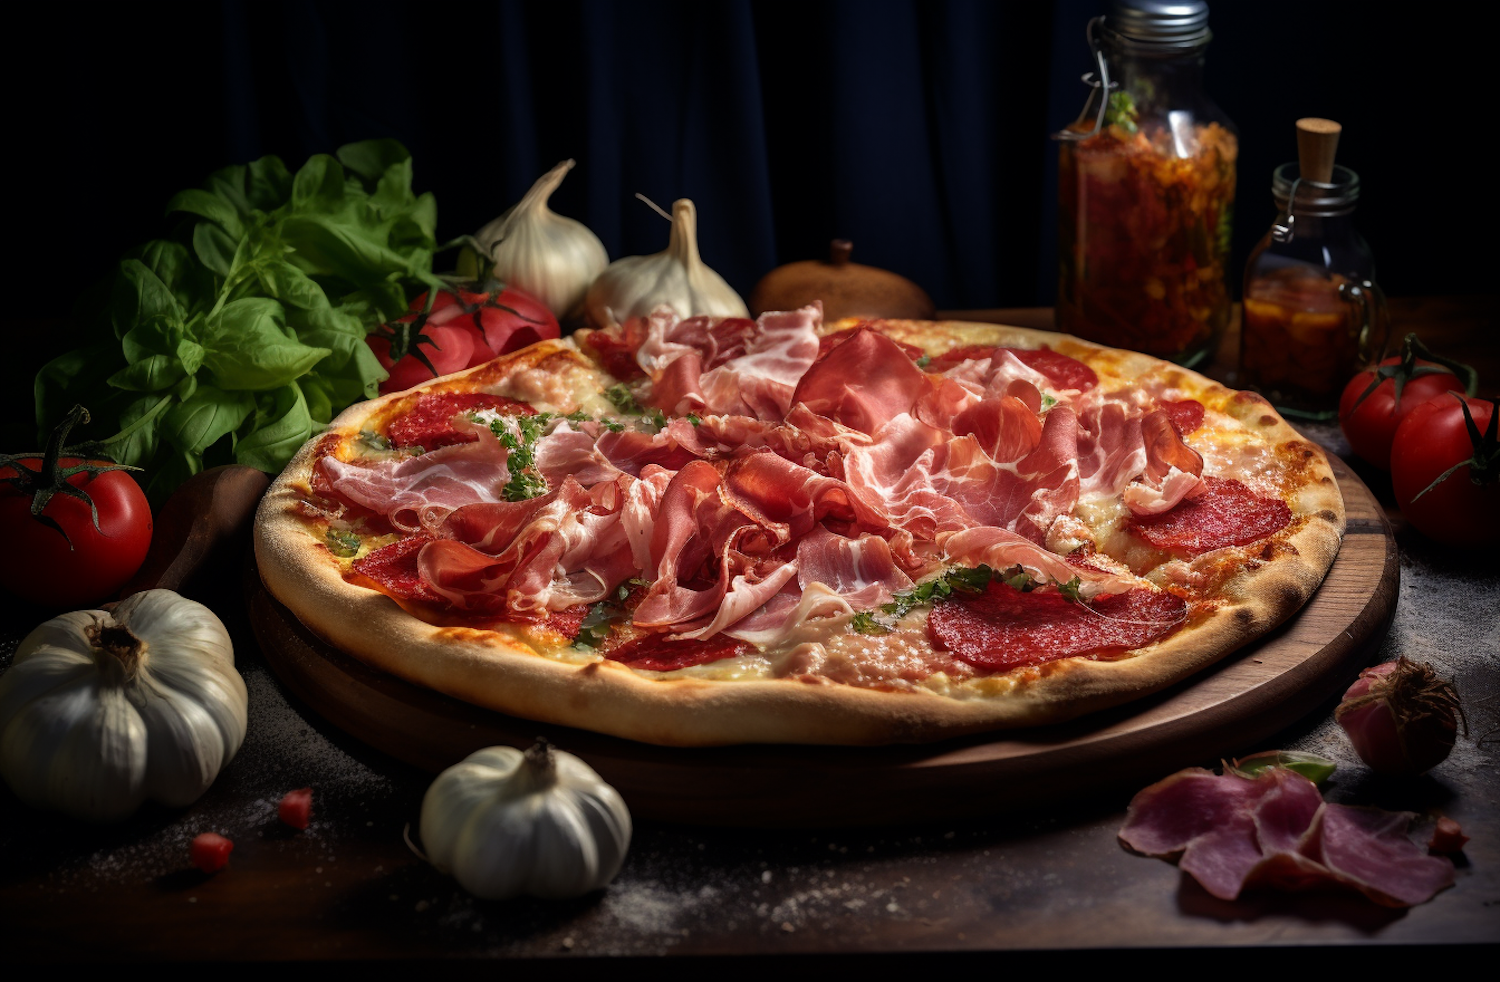 Artisanal Prosciutto and Pepperoni Pizza on Rustic Wooden Board